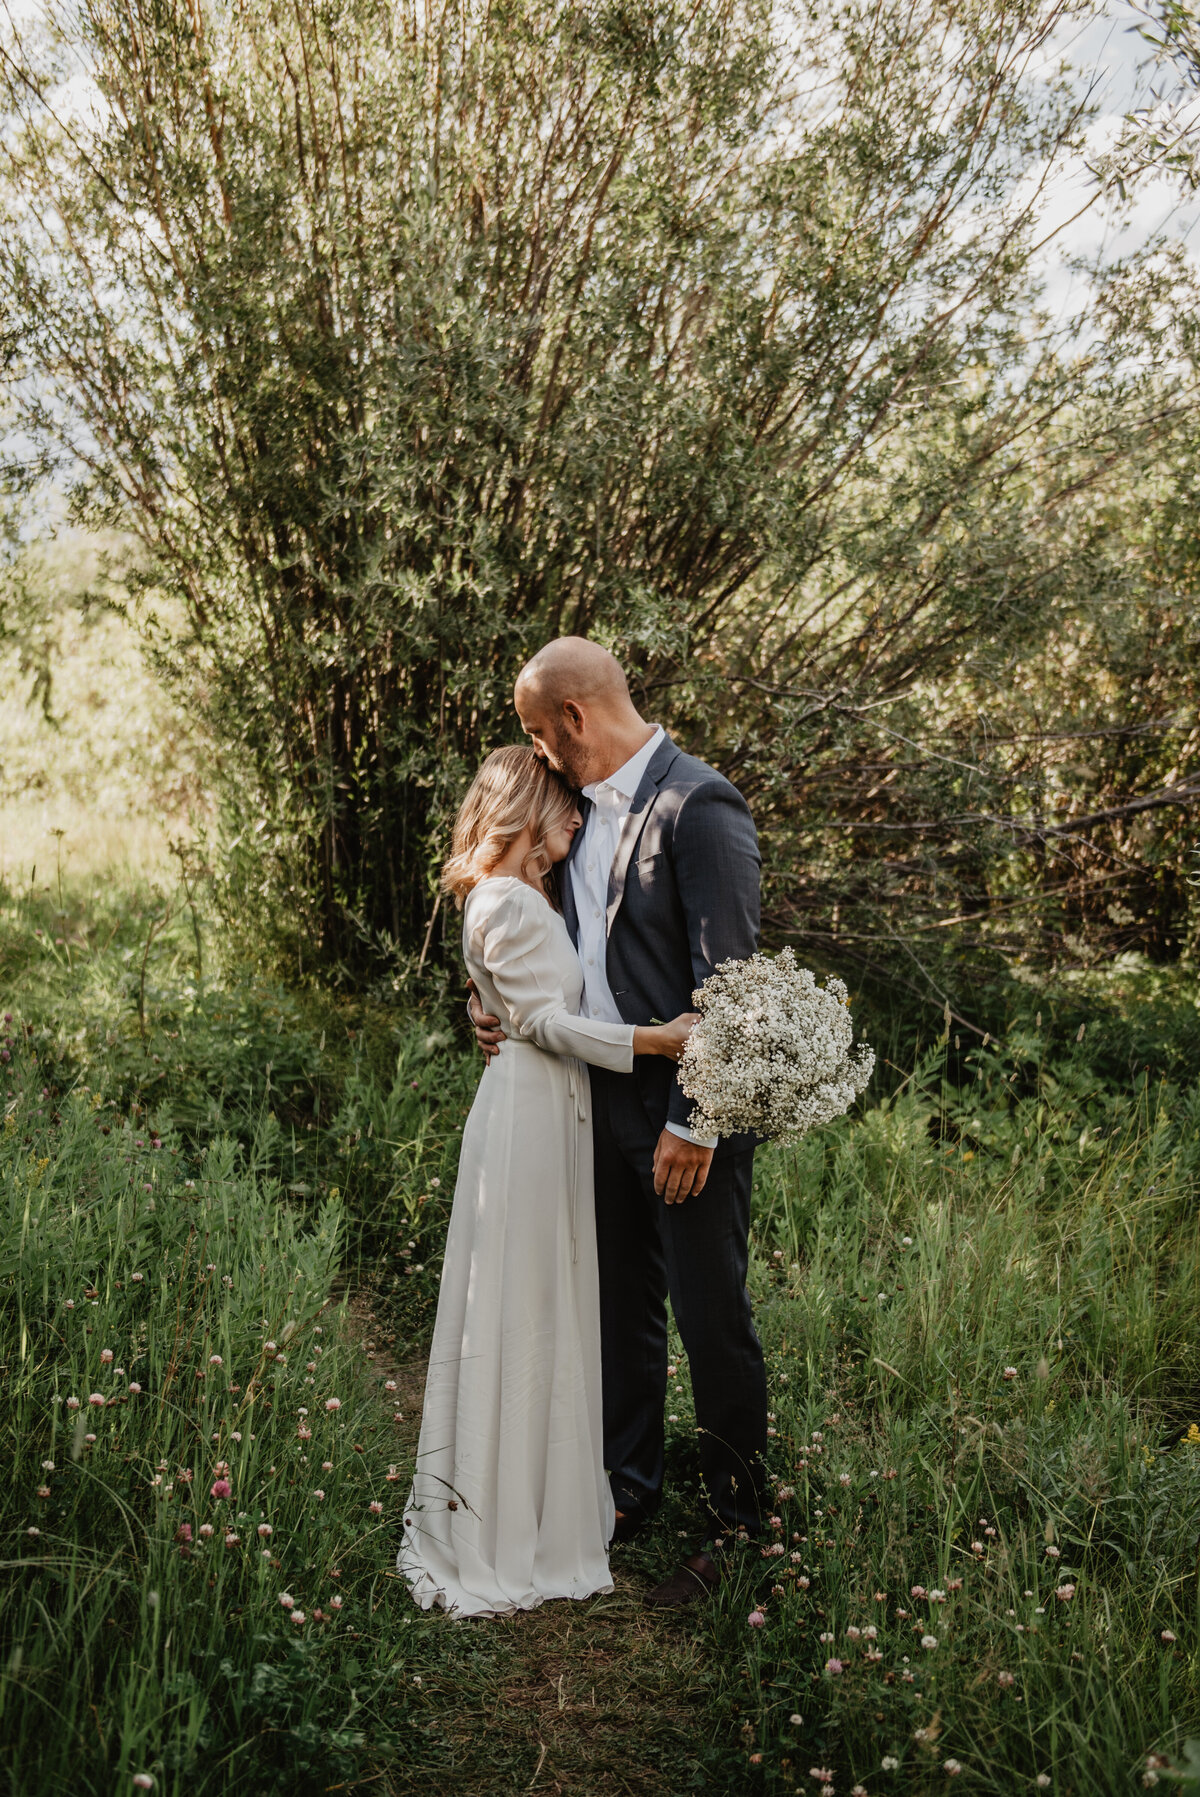 jackson wyoming photographer photographs bride and groom on their Jackson Hole wedding day holding each other and the groom is kissing the brides head as she holding her wedding bouquet